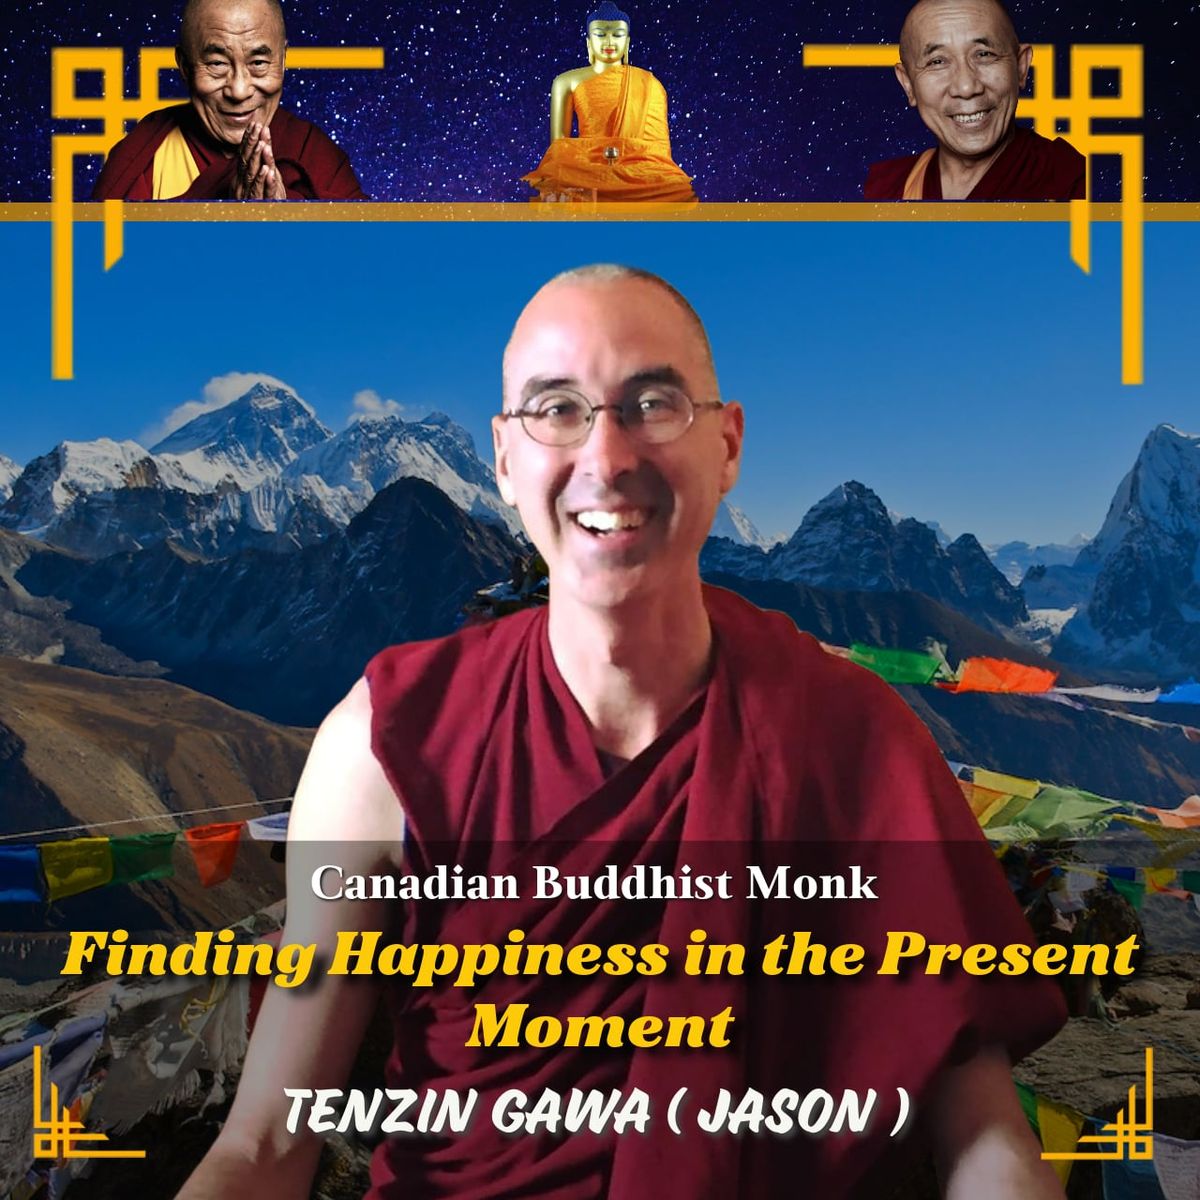 REGINA: Finding Happiness in the Present Moment - Conference with Buddhist Monk Tenzin - CANADA 2024